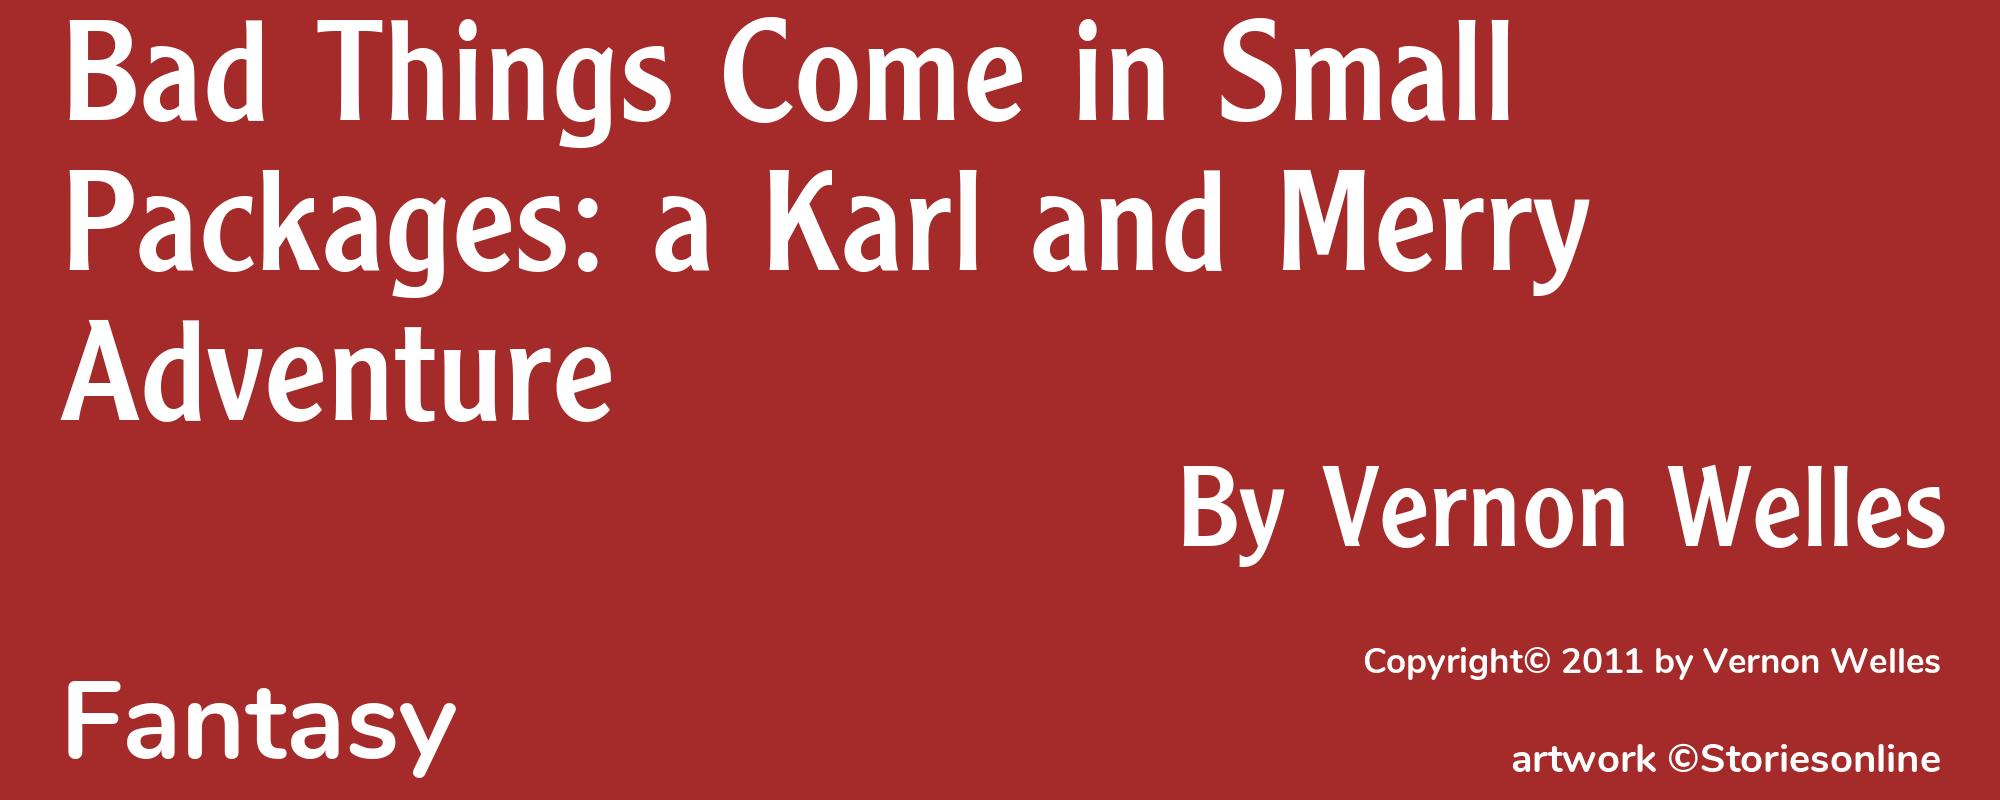 Bad Things Come in Small Packages: a Karl and Merry Adventure - Cover